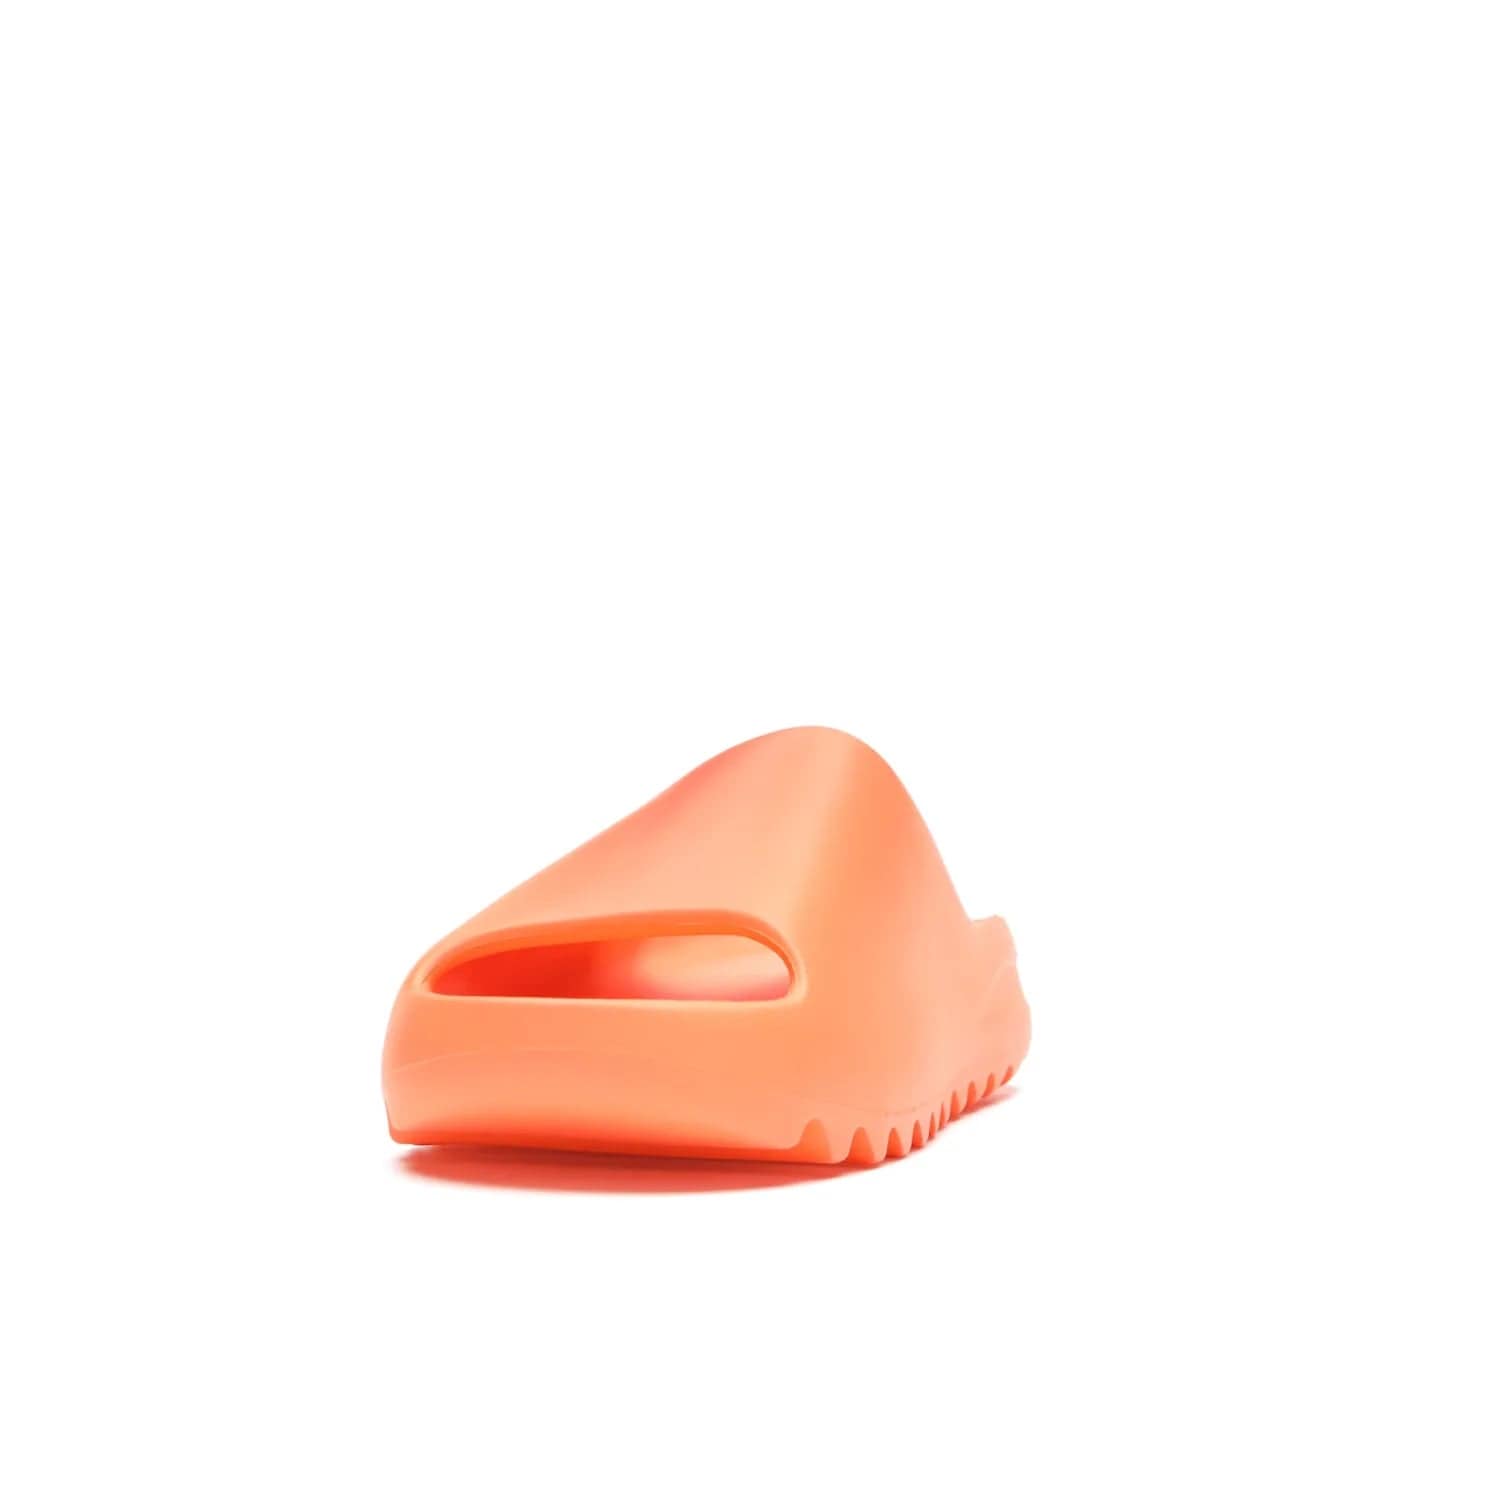 adidas Yeezy Slide Enflame Orange - Image 12 - Only at www.BallersClubKickz.com - Limited edition adidas Yeezy Slide featuring a bold Enflame Orange upper and EVA foam construction. Grooved outsole for traction and support. Released June 2021. Perfect for summer.